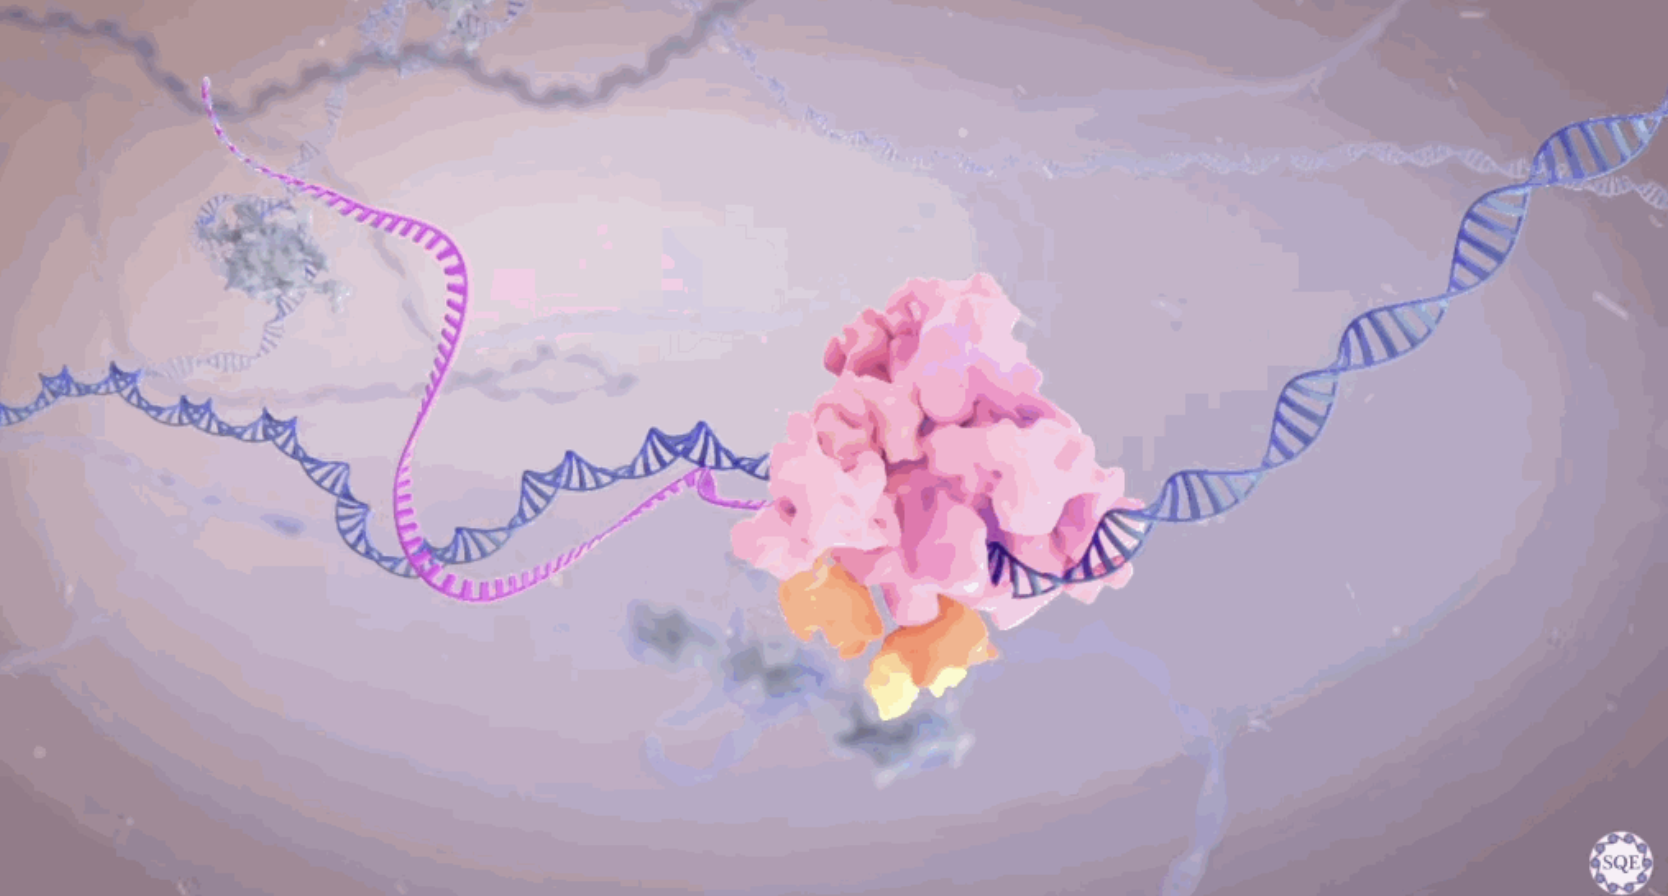 RNA Polymerase II (shown in pink and orange) moves across a strand of DNA (shown in blue) and produces a complementary RNA strand (shown in magenta). 